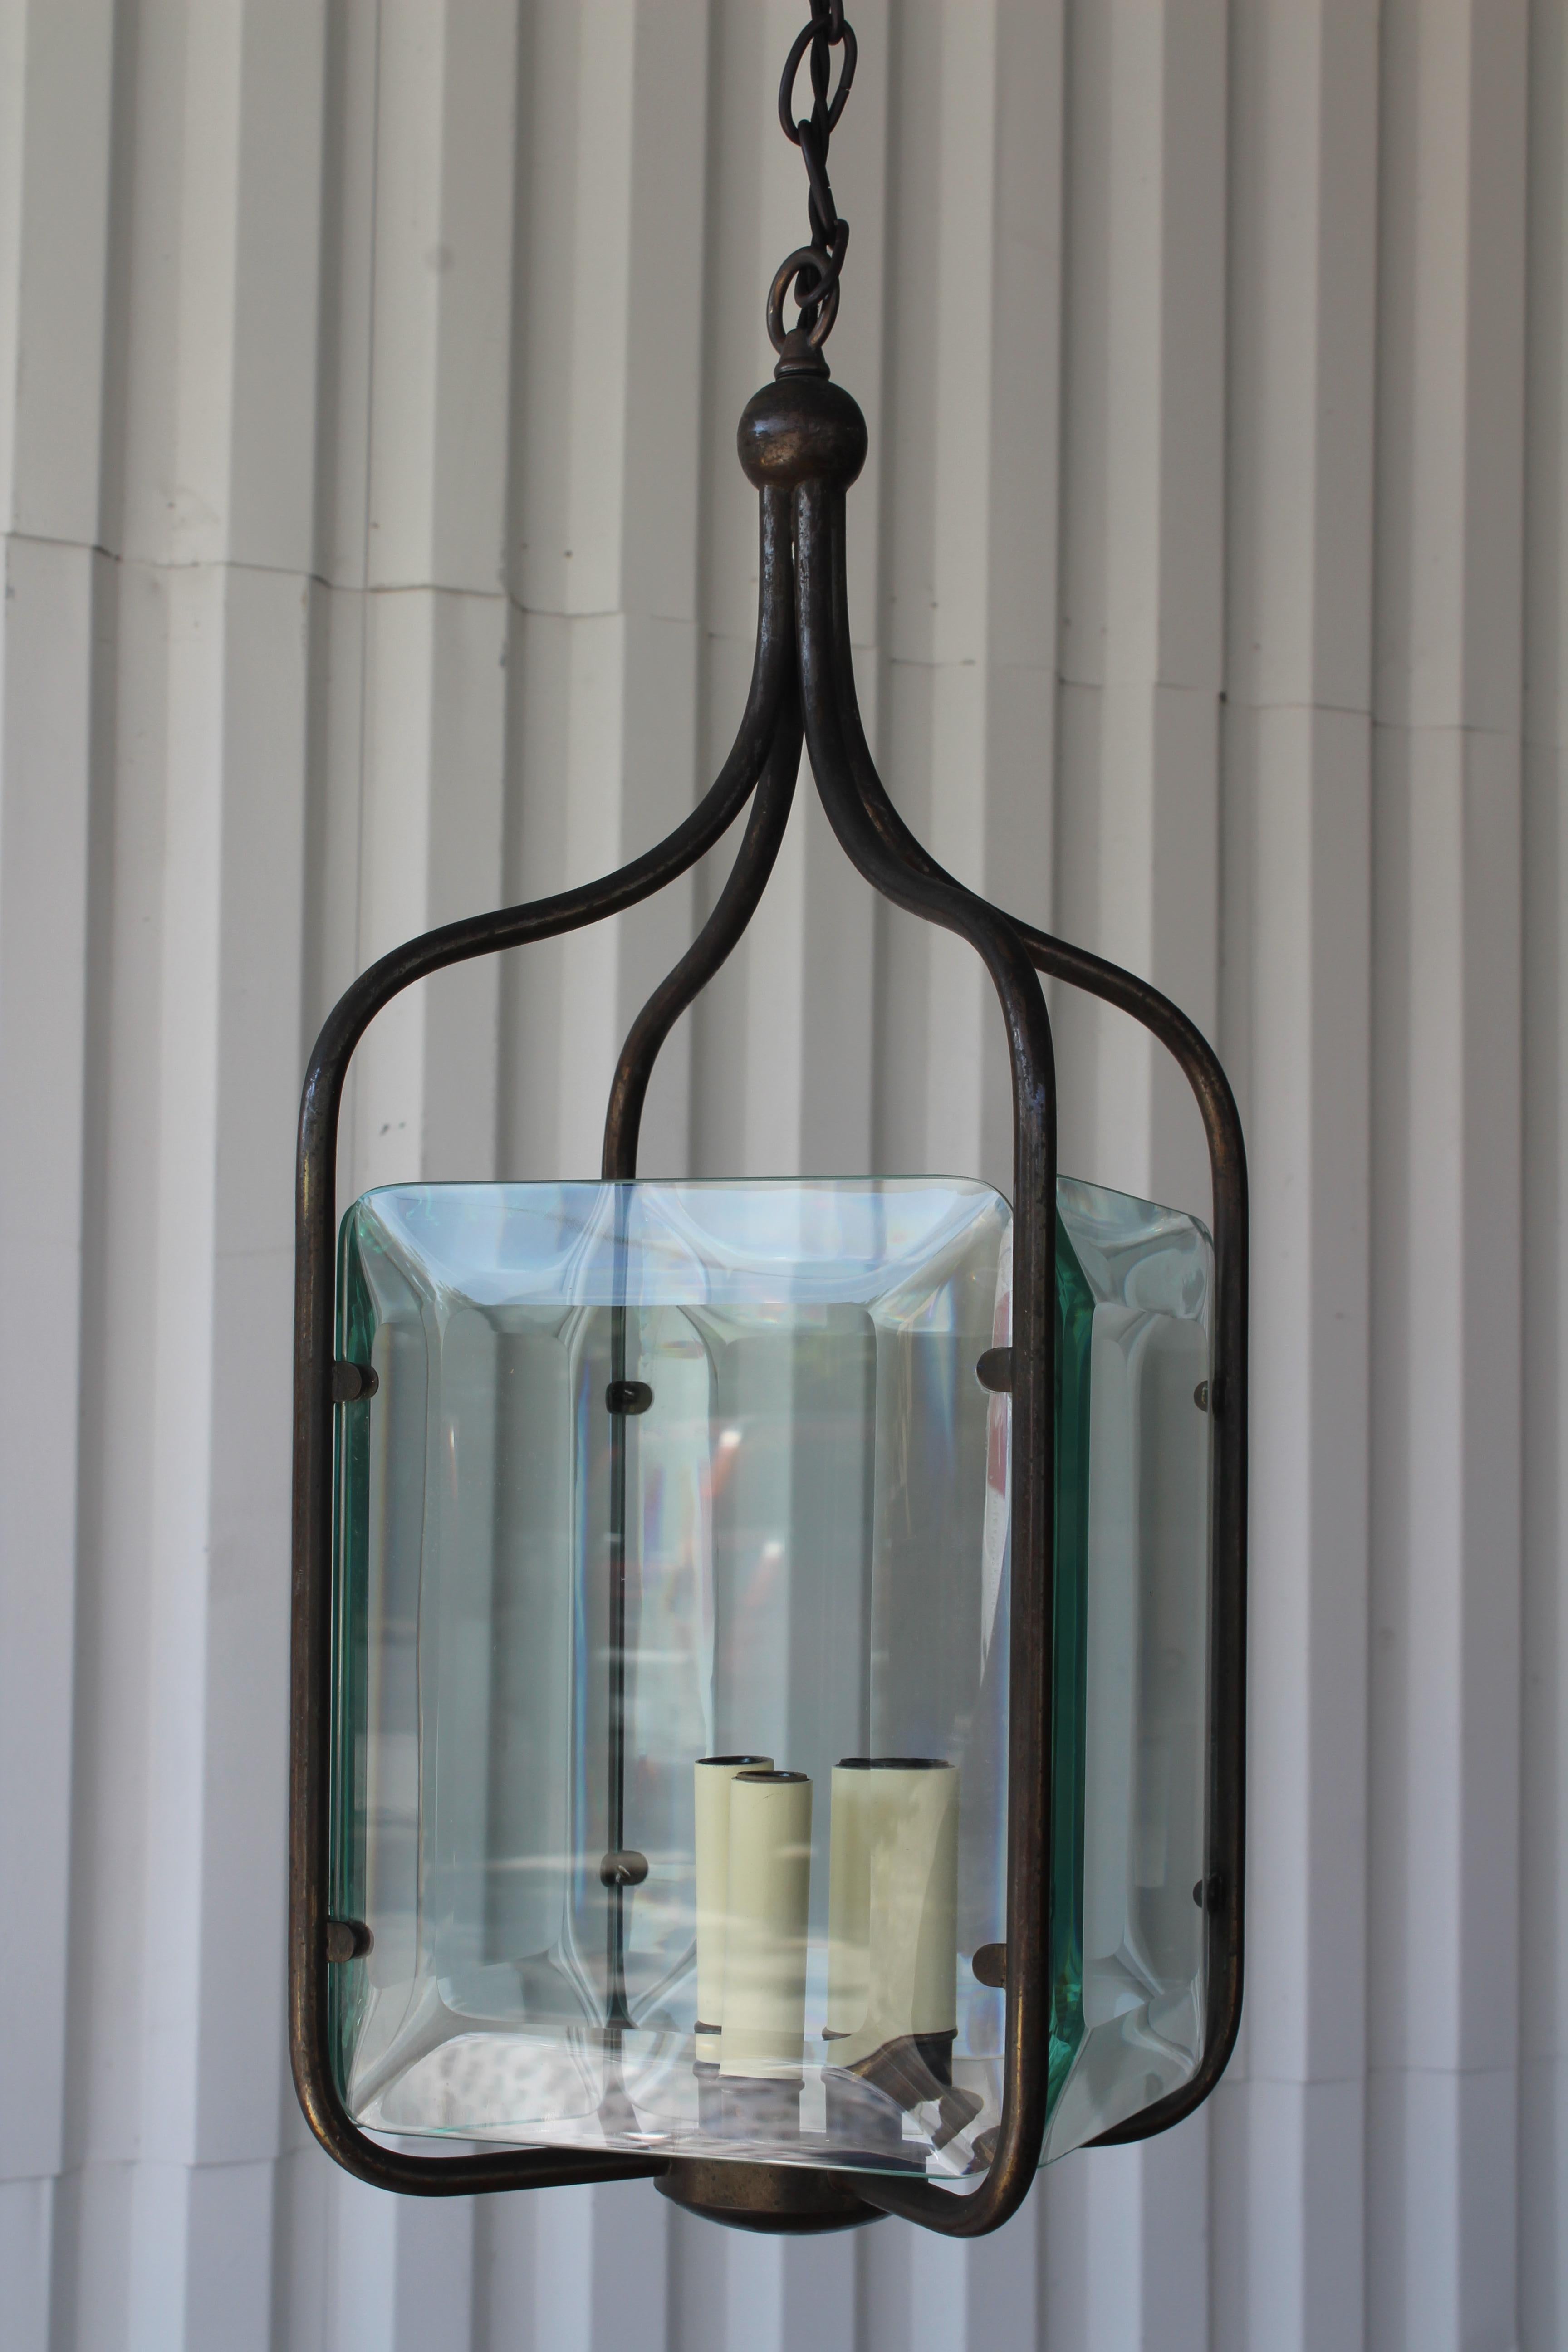 Vintage bronze hanging pendant with four glass panels. Newly rewired and new beveled glass panels which matched the original. Fitted for three candelabra 60W bulbs. In excellent condition with a nice patina to the bronze. Total length from canopy to